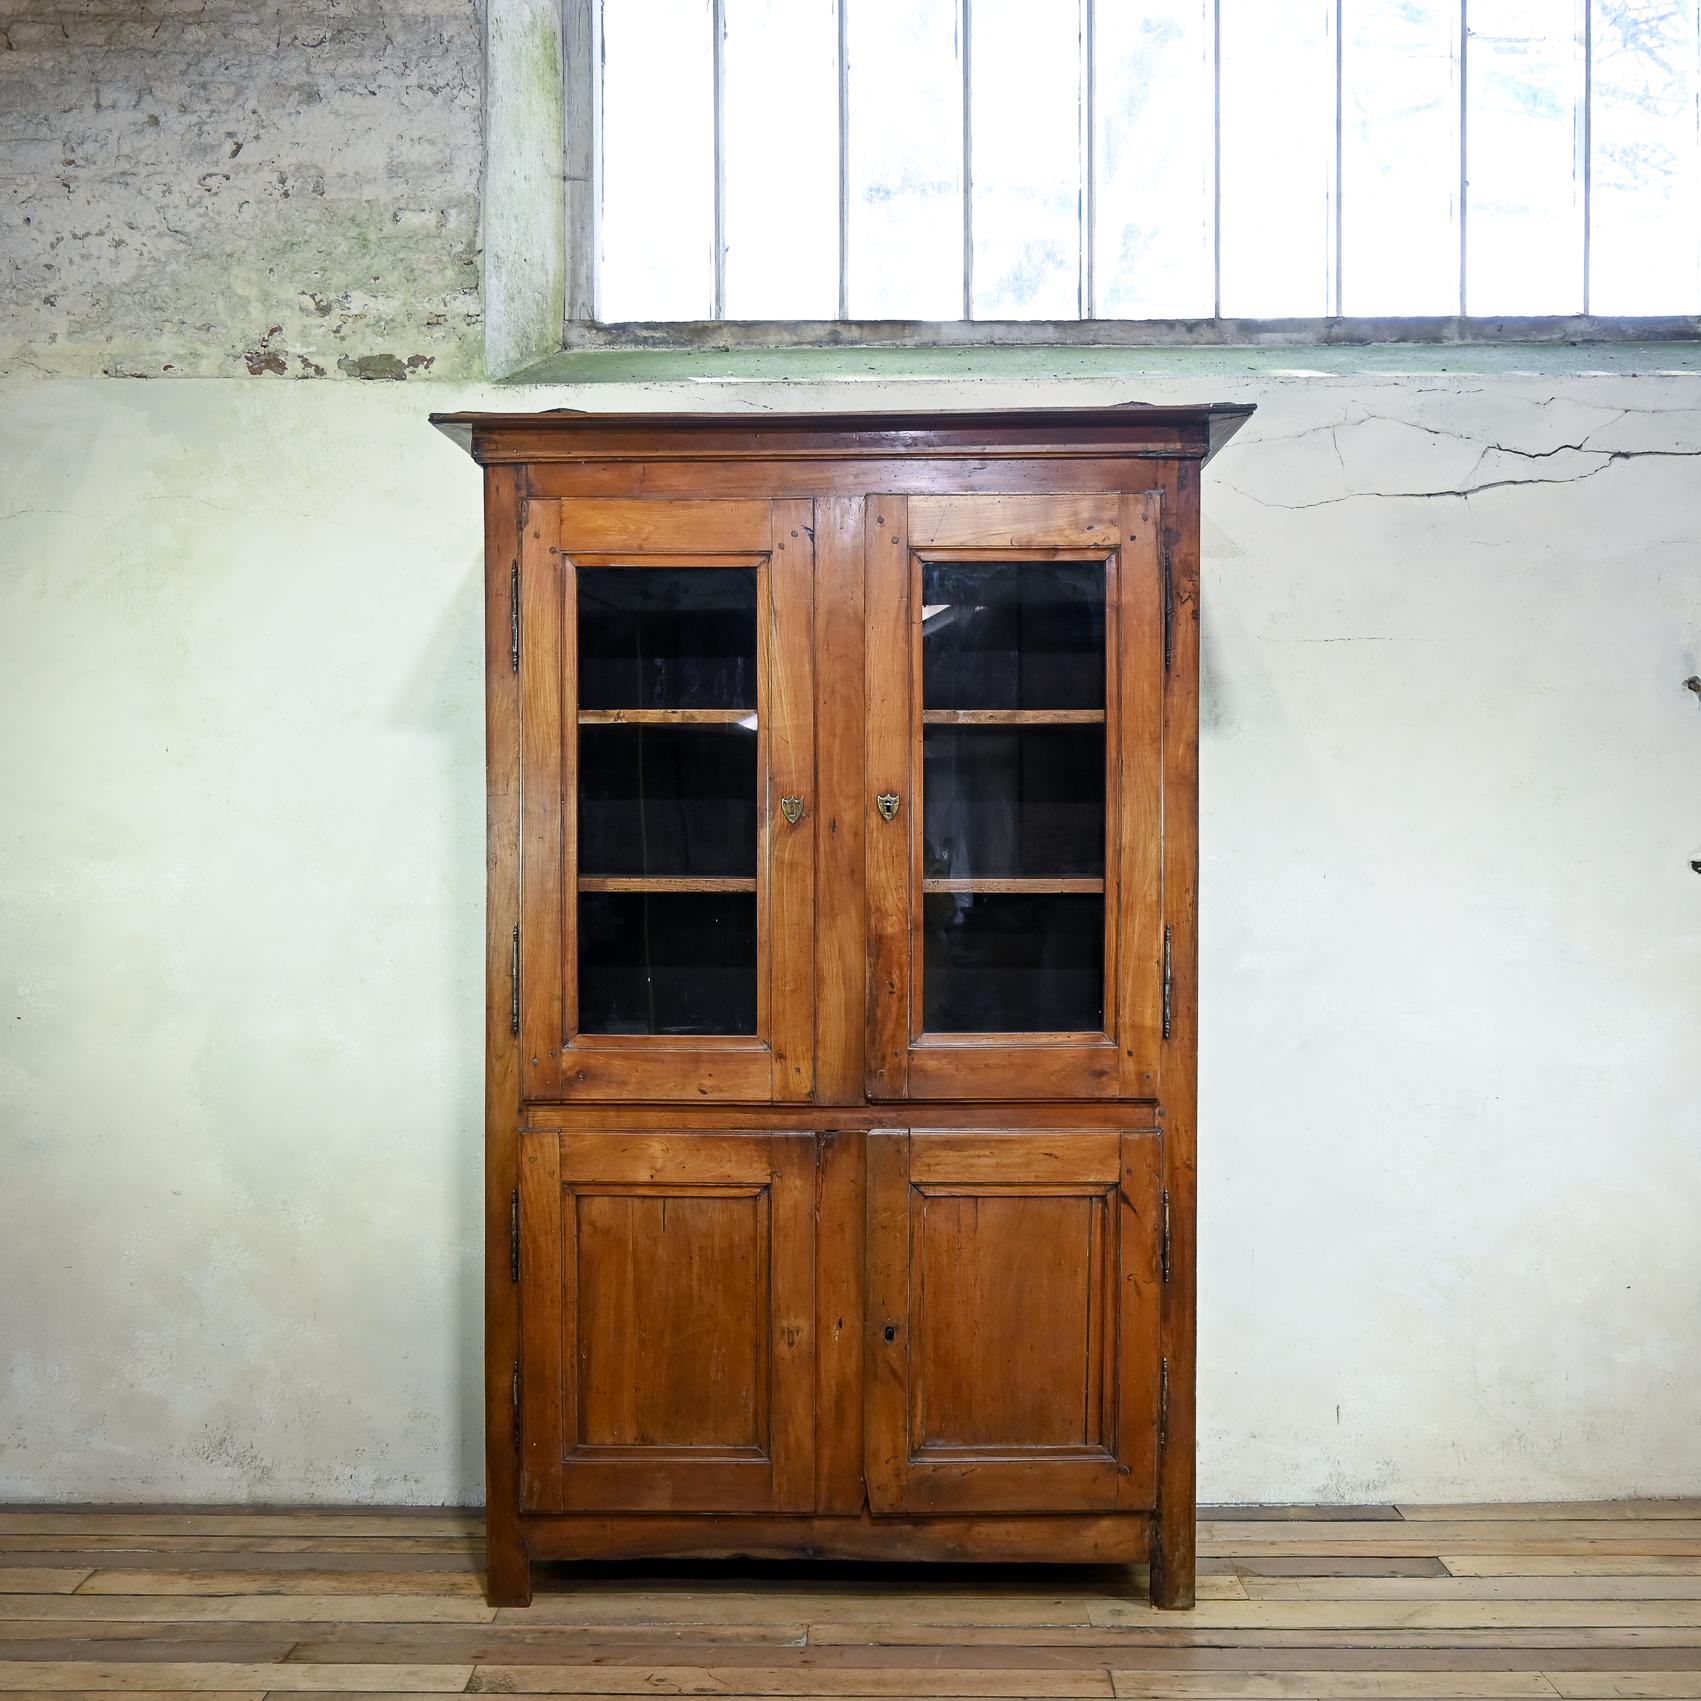 A charming Mid-19th Century French cherry wood cupboard. Displaying a simplistic moulded cornice above a pair of inset glass doors with a further pair of panelled doors below featuring three fixed interior shelves. Raised on block feet.